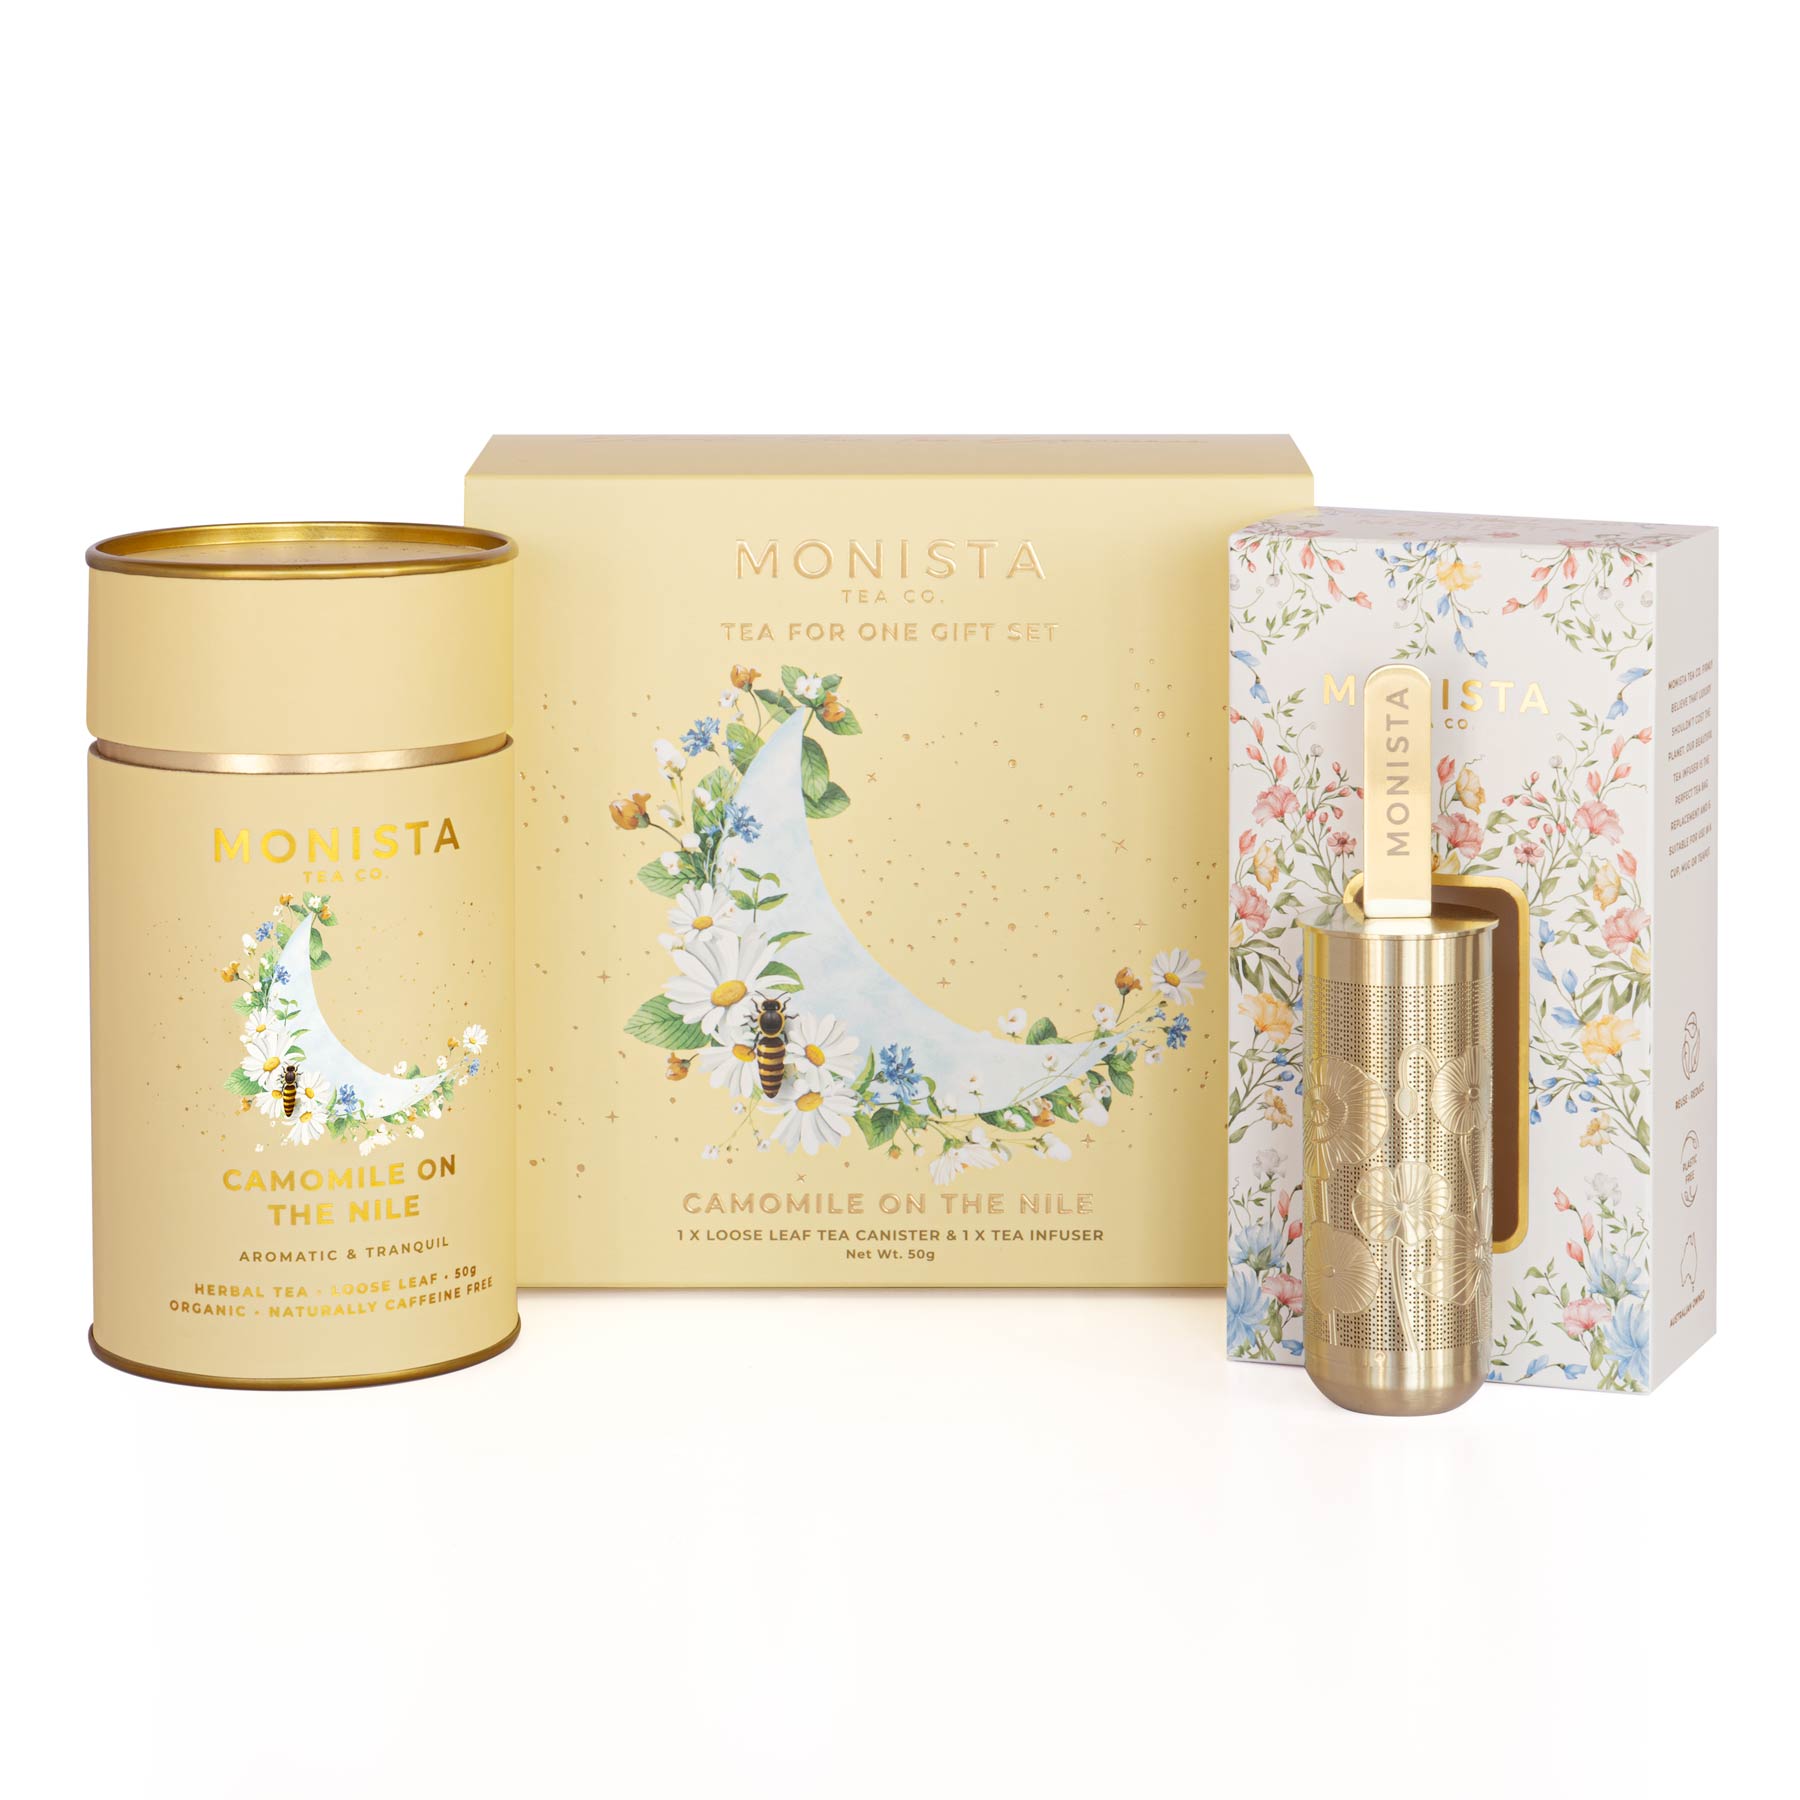 Tea gift set with one yellow tea canister and stick tea infuser